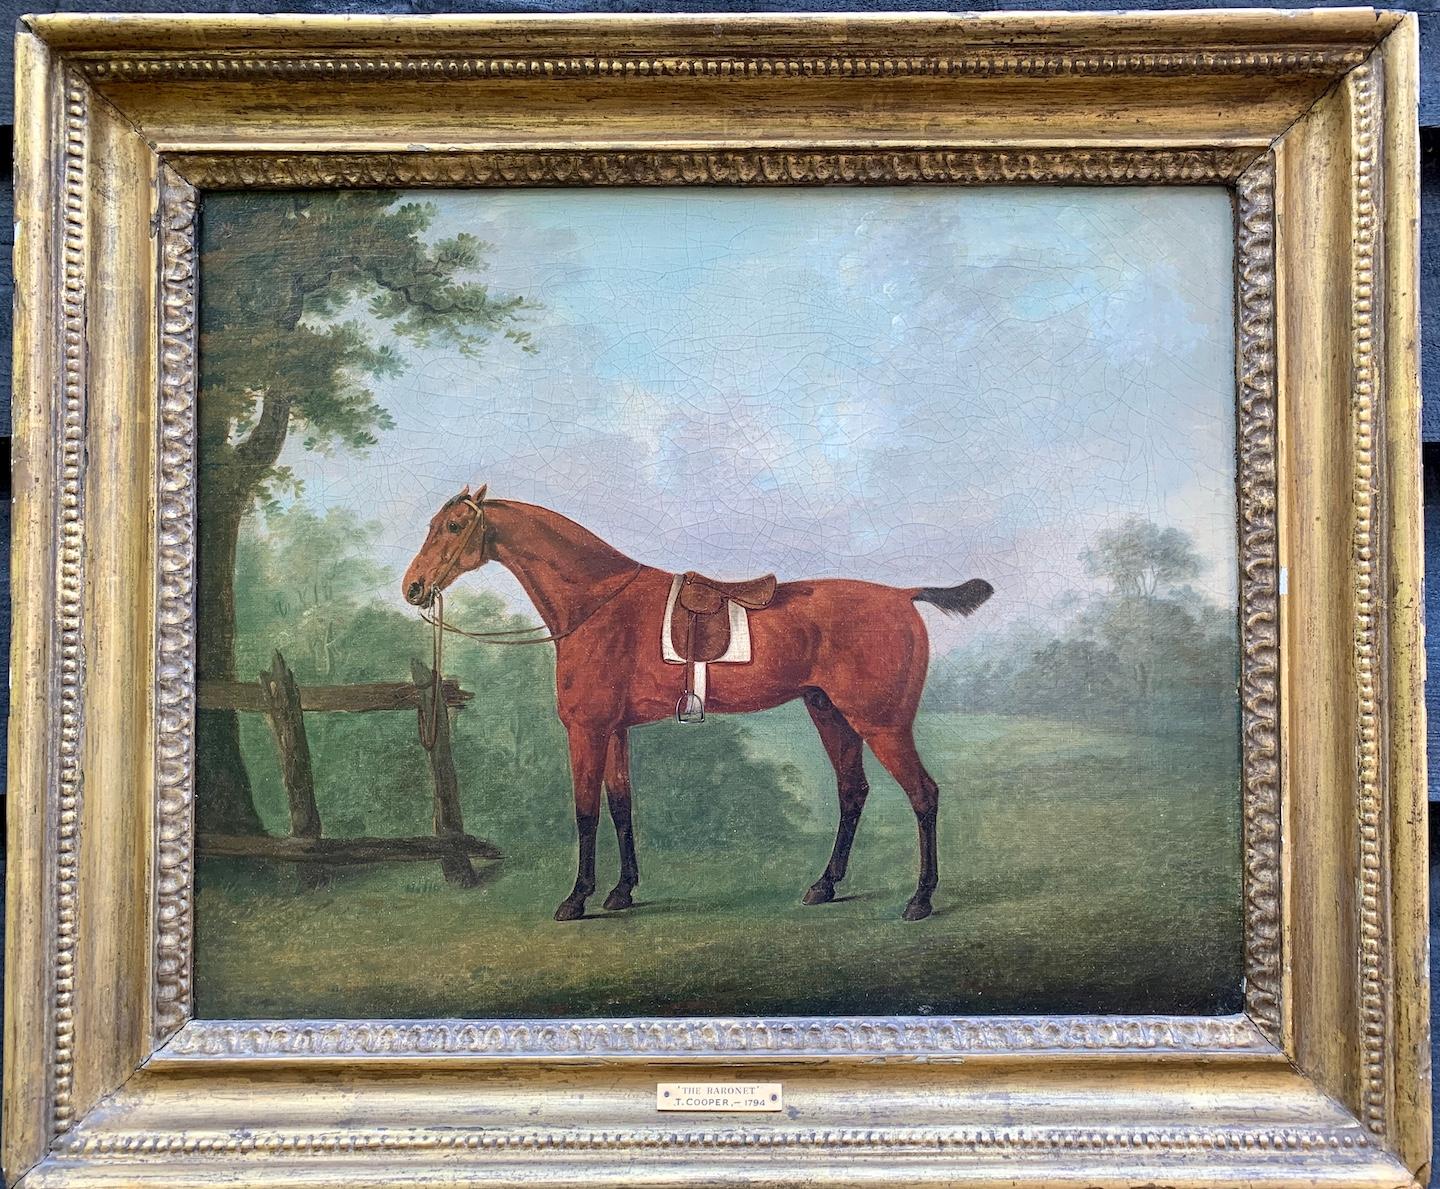 T.Cooper Animal Painting - 18th century English portrait of the  Horse 'The Baronet' in a landscape